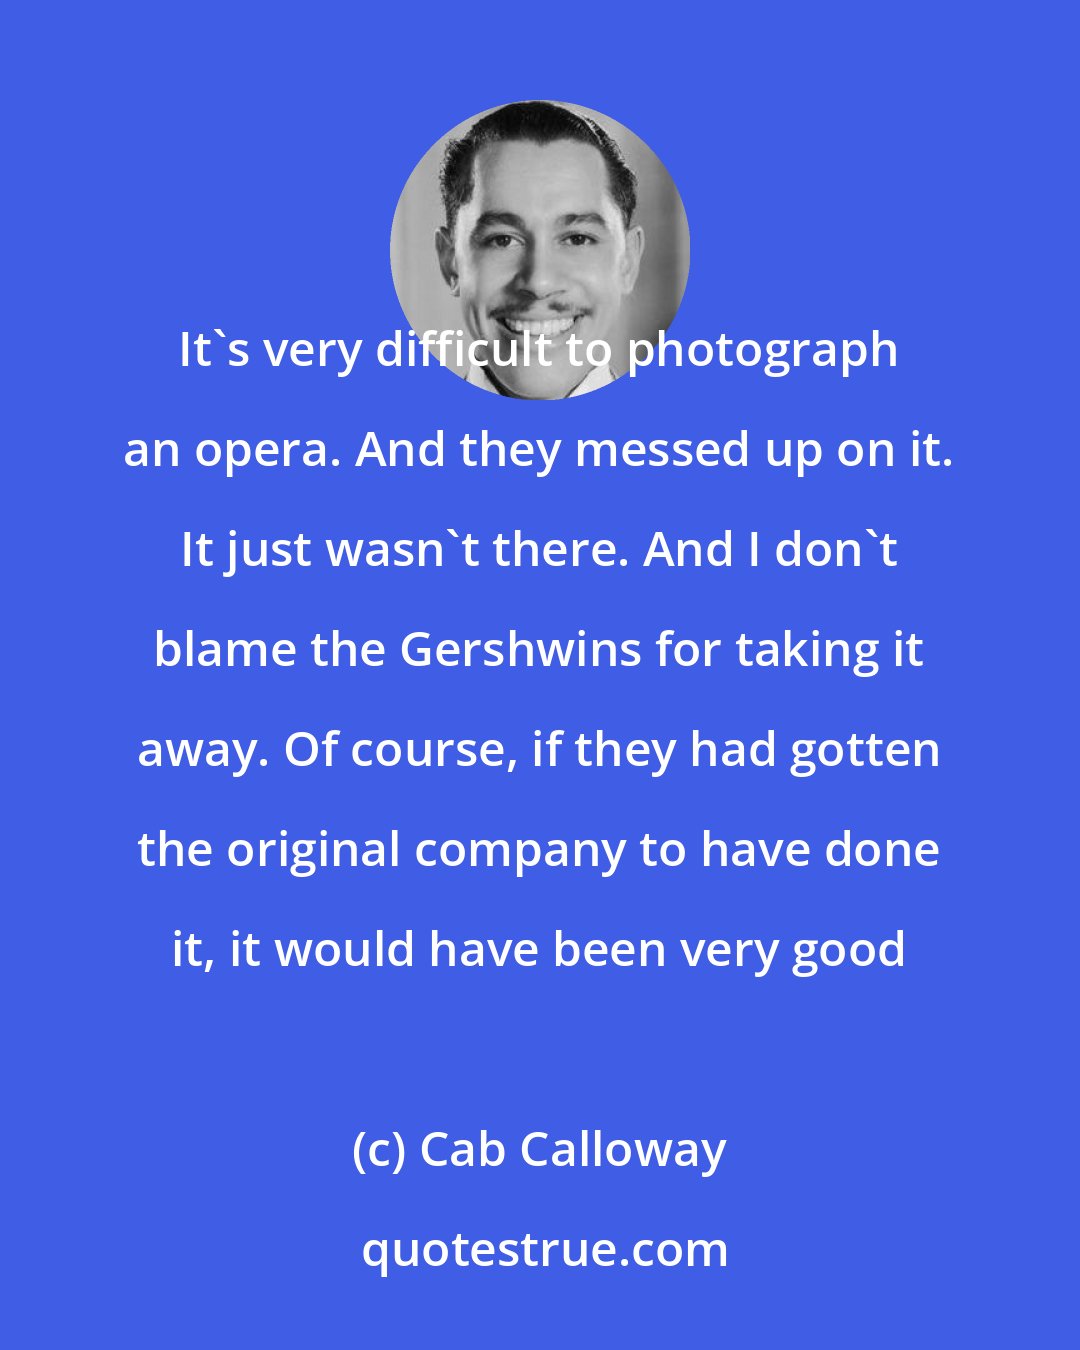 Cab Calloway: It's very difficult to photograph an opera. And they messed up on it. It just wasn't there. And I don't blame the Gershwins for taking it away. Of course, if they had gotten the original company to have done it, it would have been very good